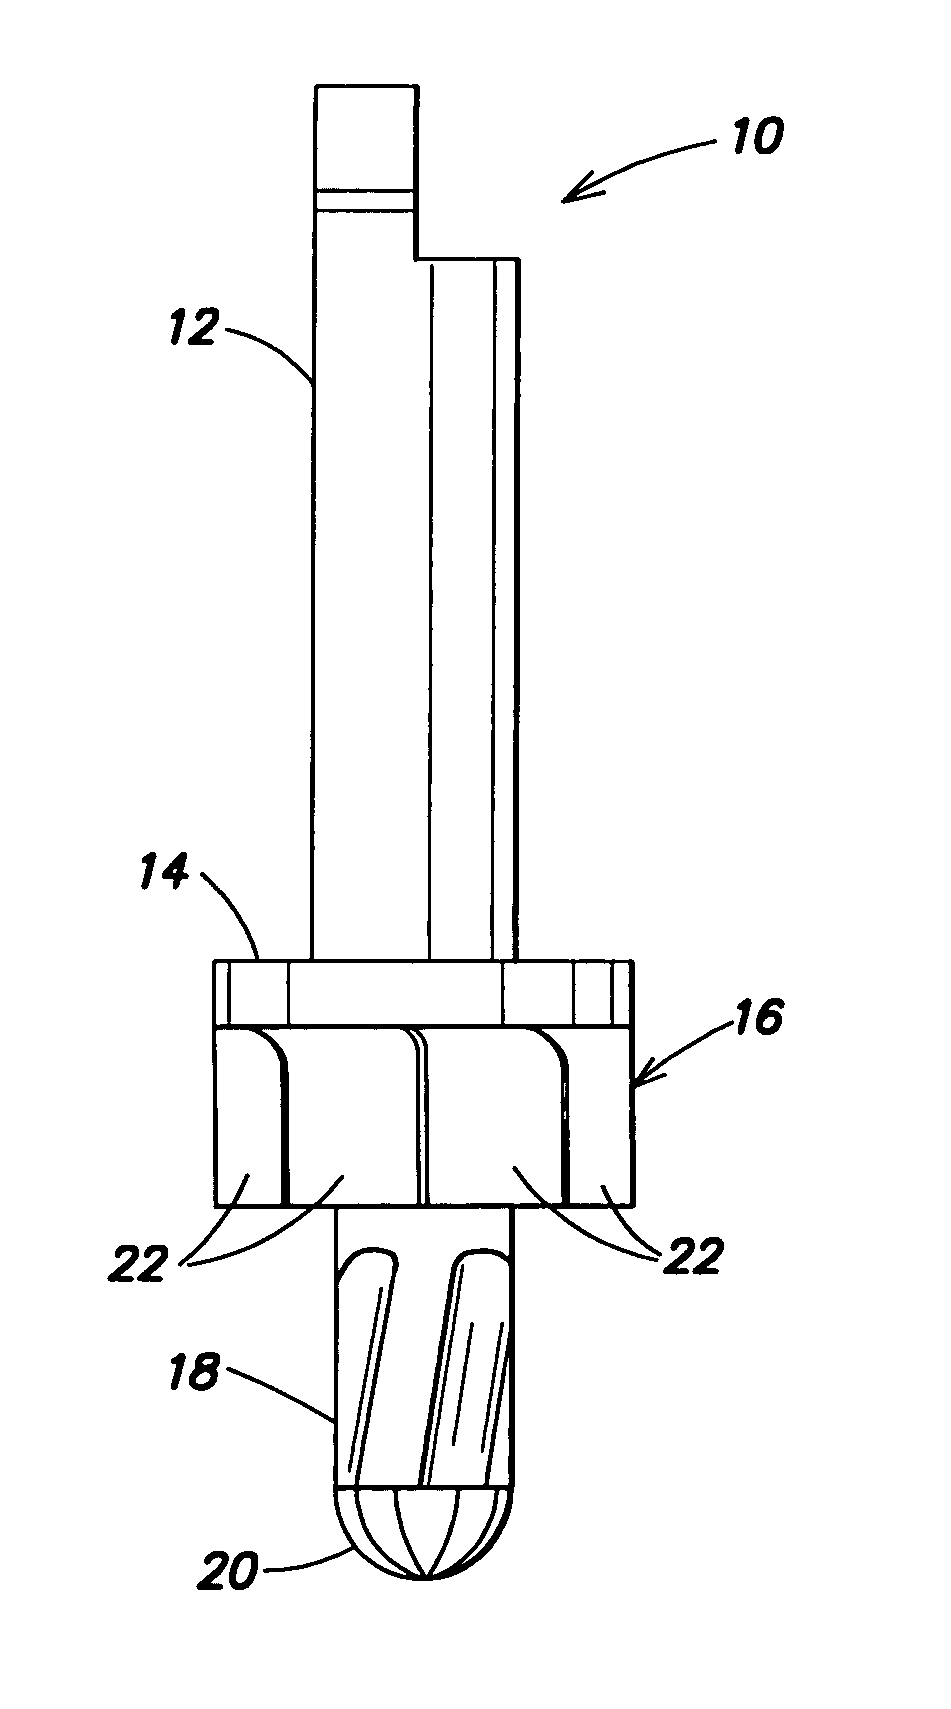 Drilling system and method for dental implants